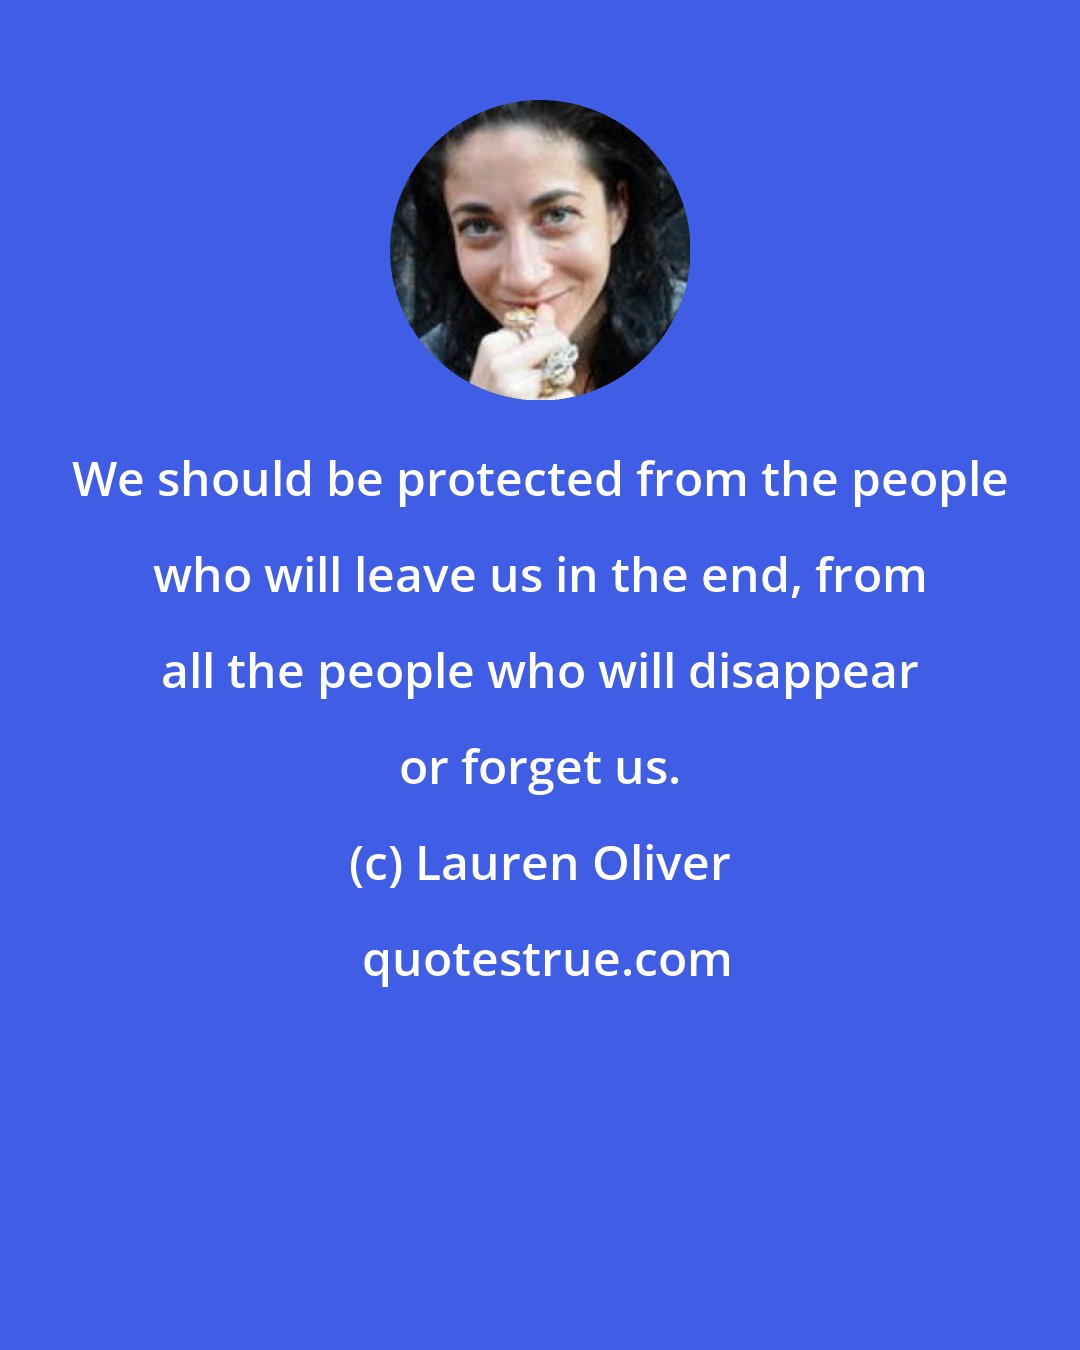 Lauren Oliver: We should be protected from the people who will leave us in the end, from all the people who will disappear or forget us.